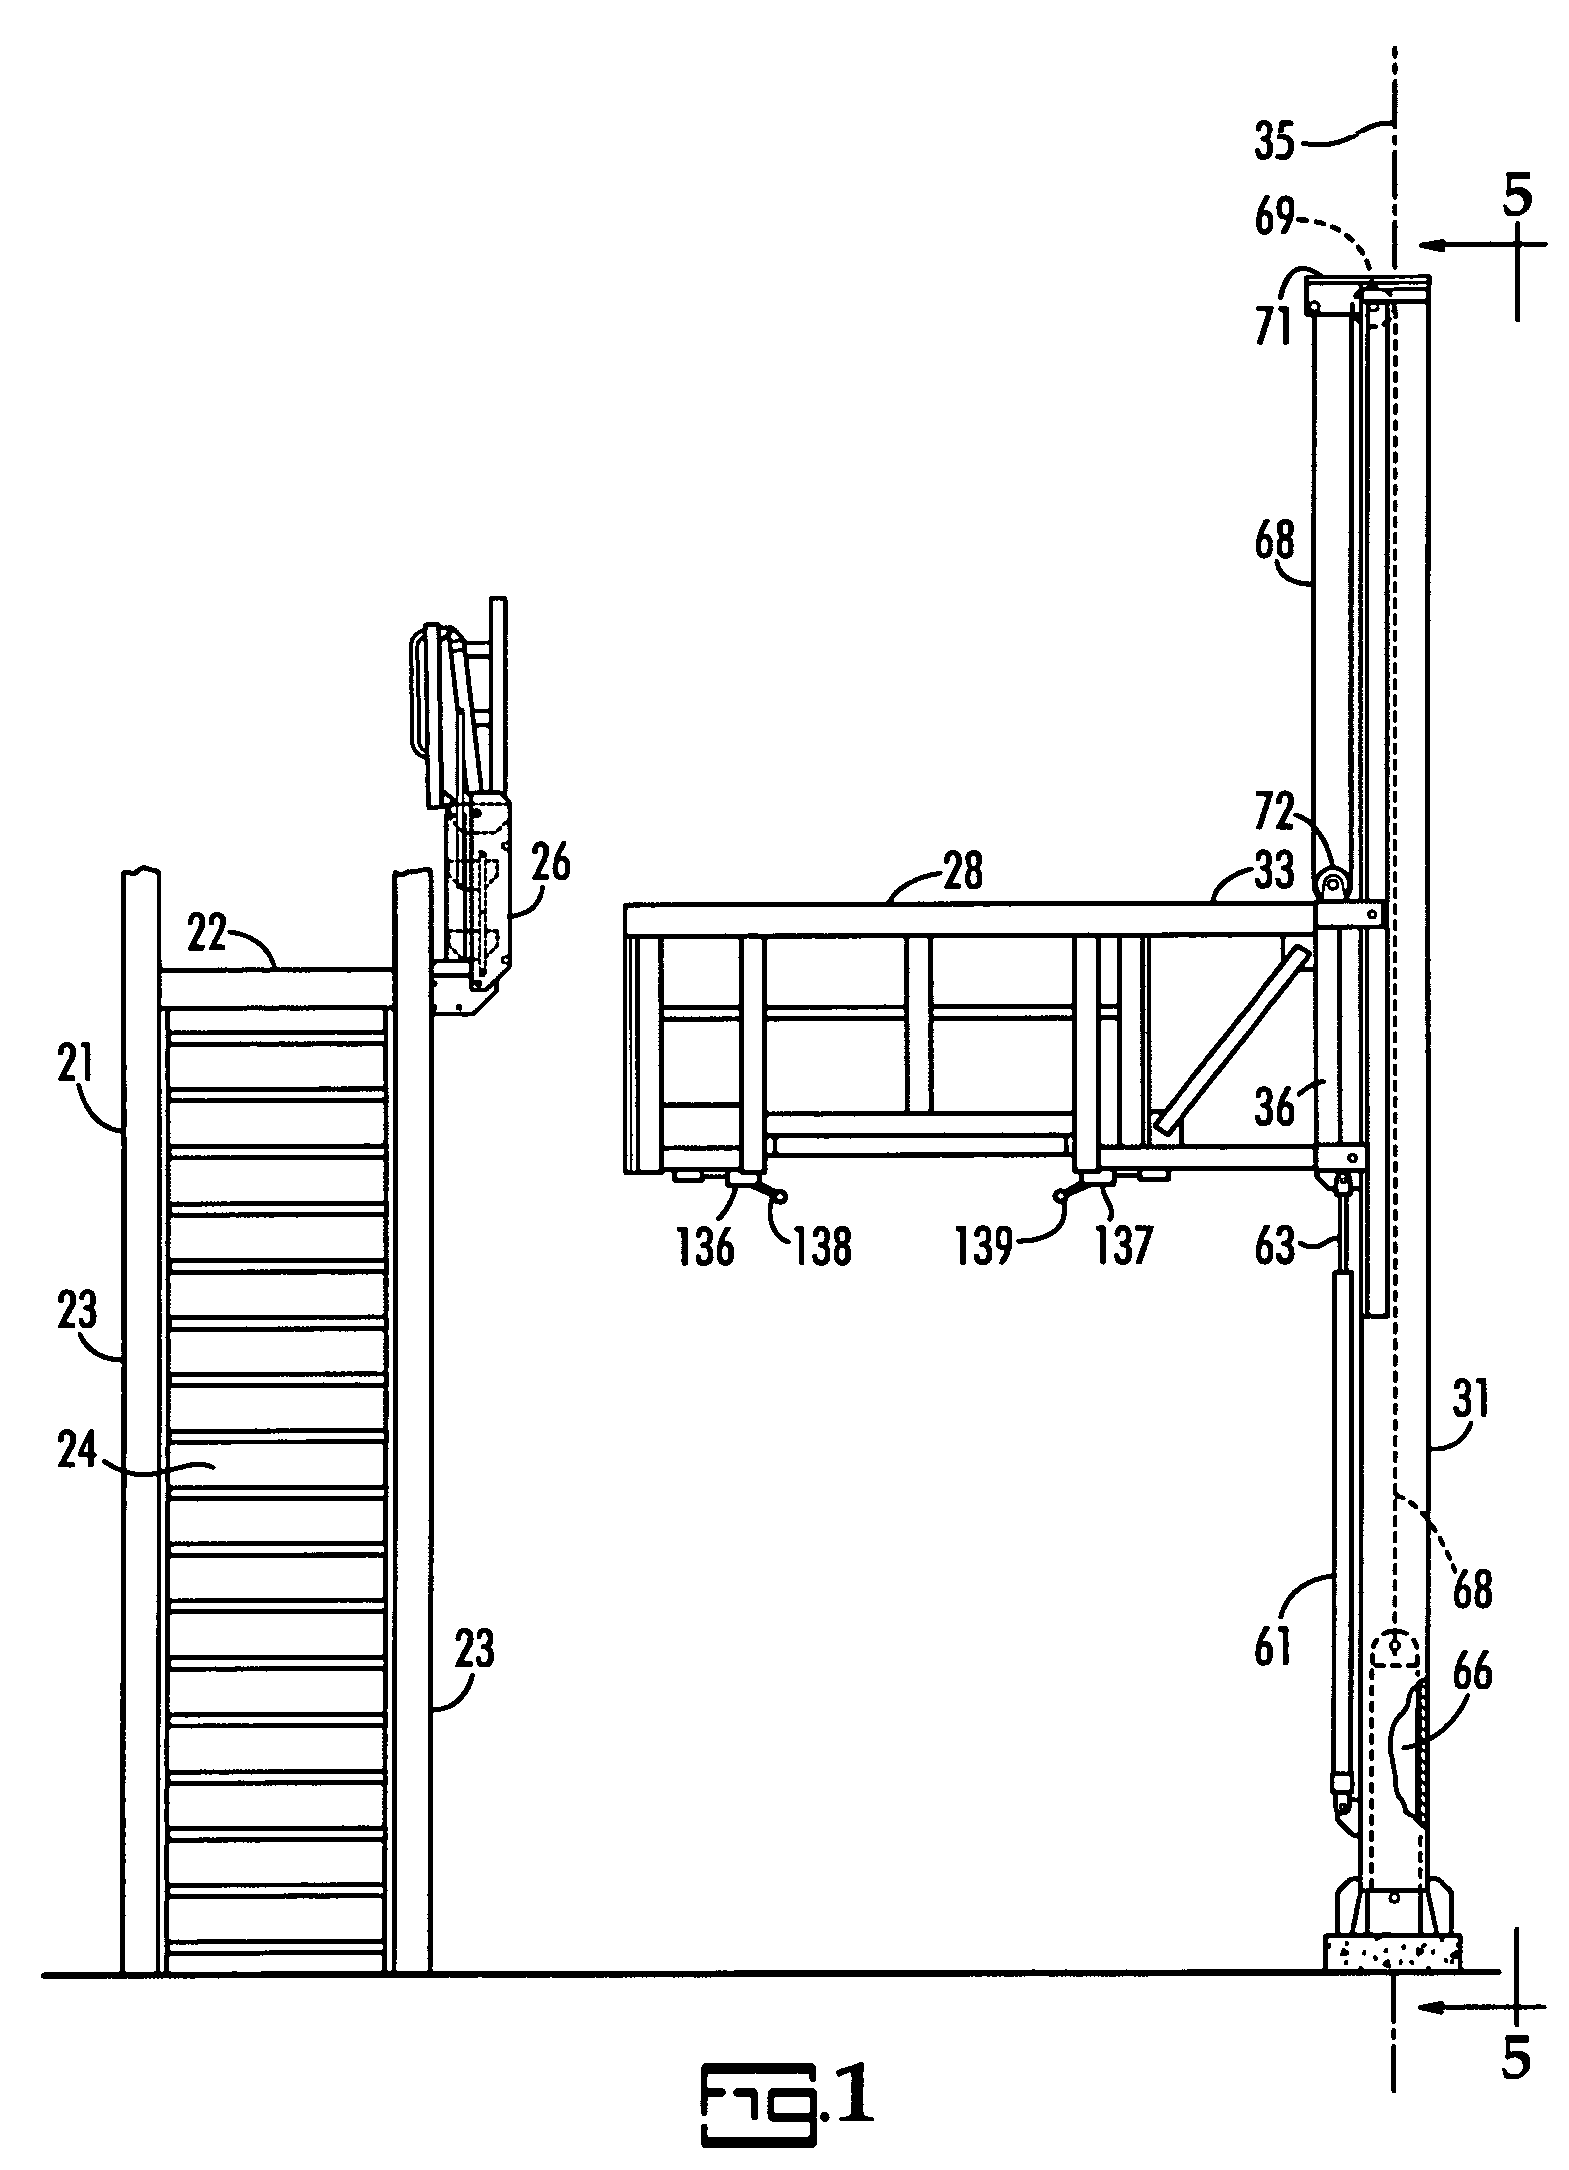 Bulk material transport vehicle access structure